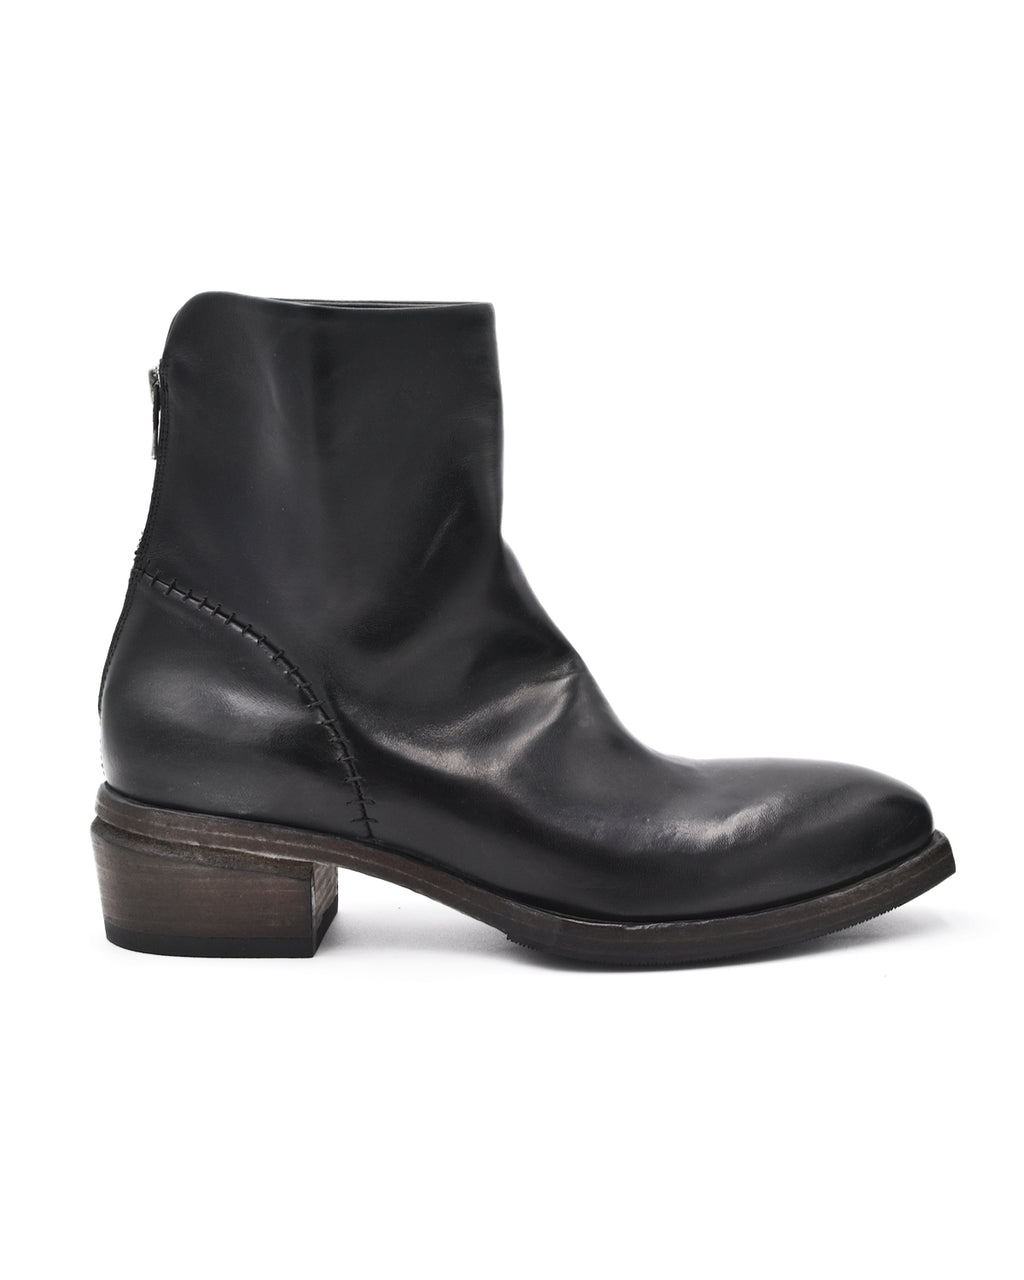 Shoto Black Point Toe Ankle Boot